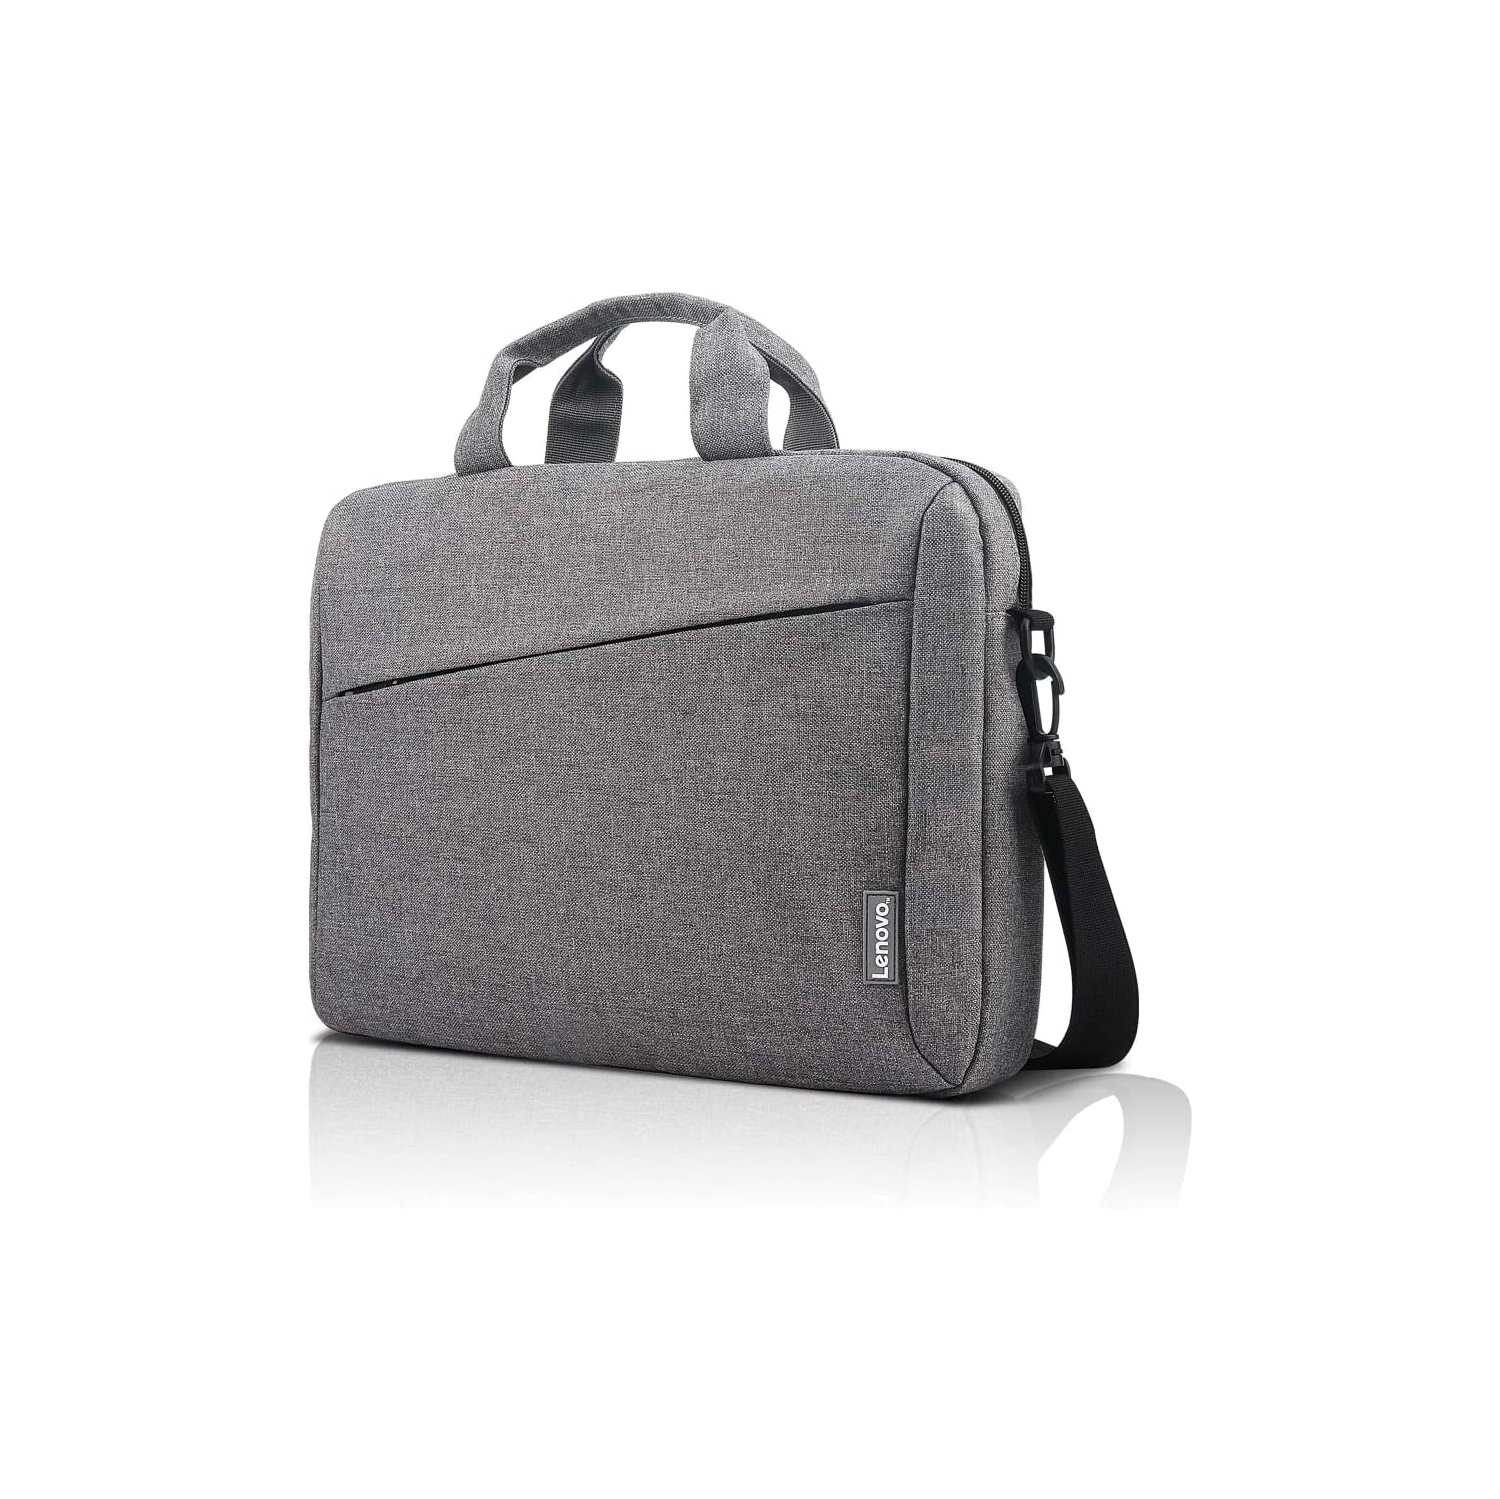 Lenovo Laptop Carrying Case T210, fits 15.6-Inch Laptop and Tablet,Sleek Design,Durable and Water-Repellent